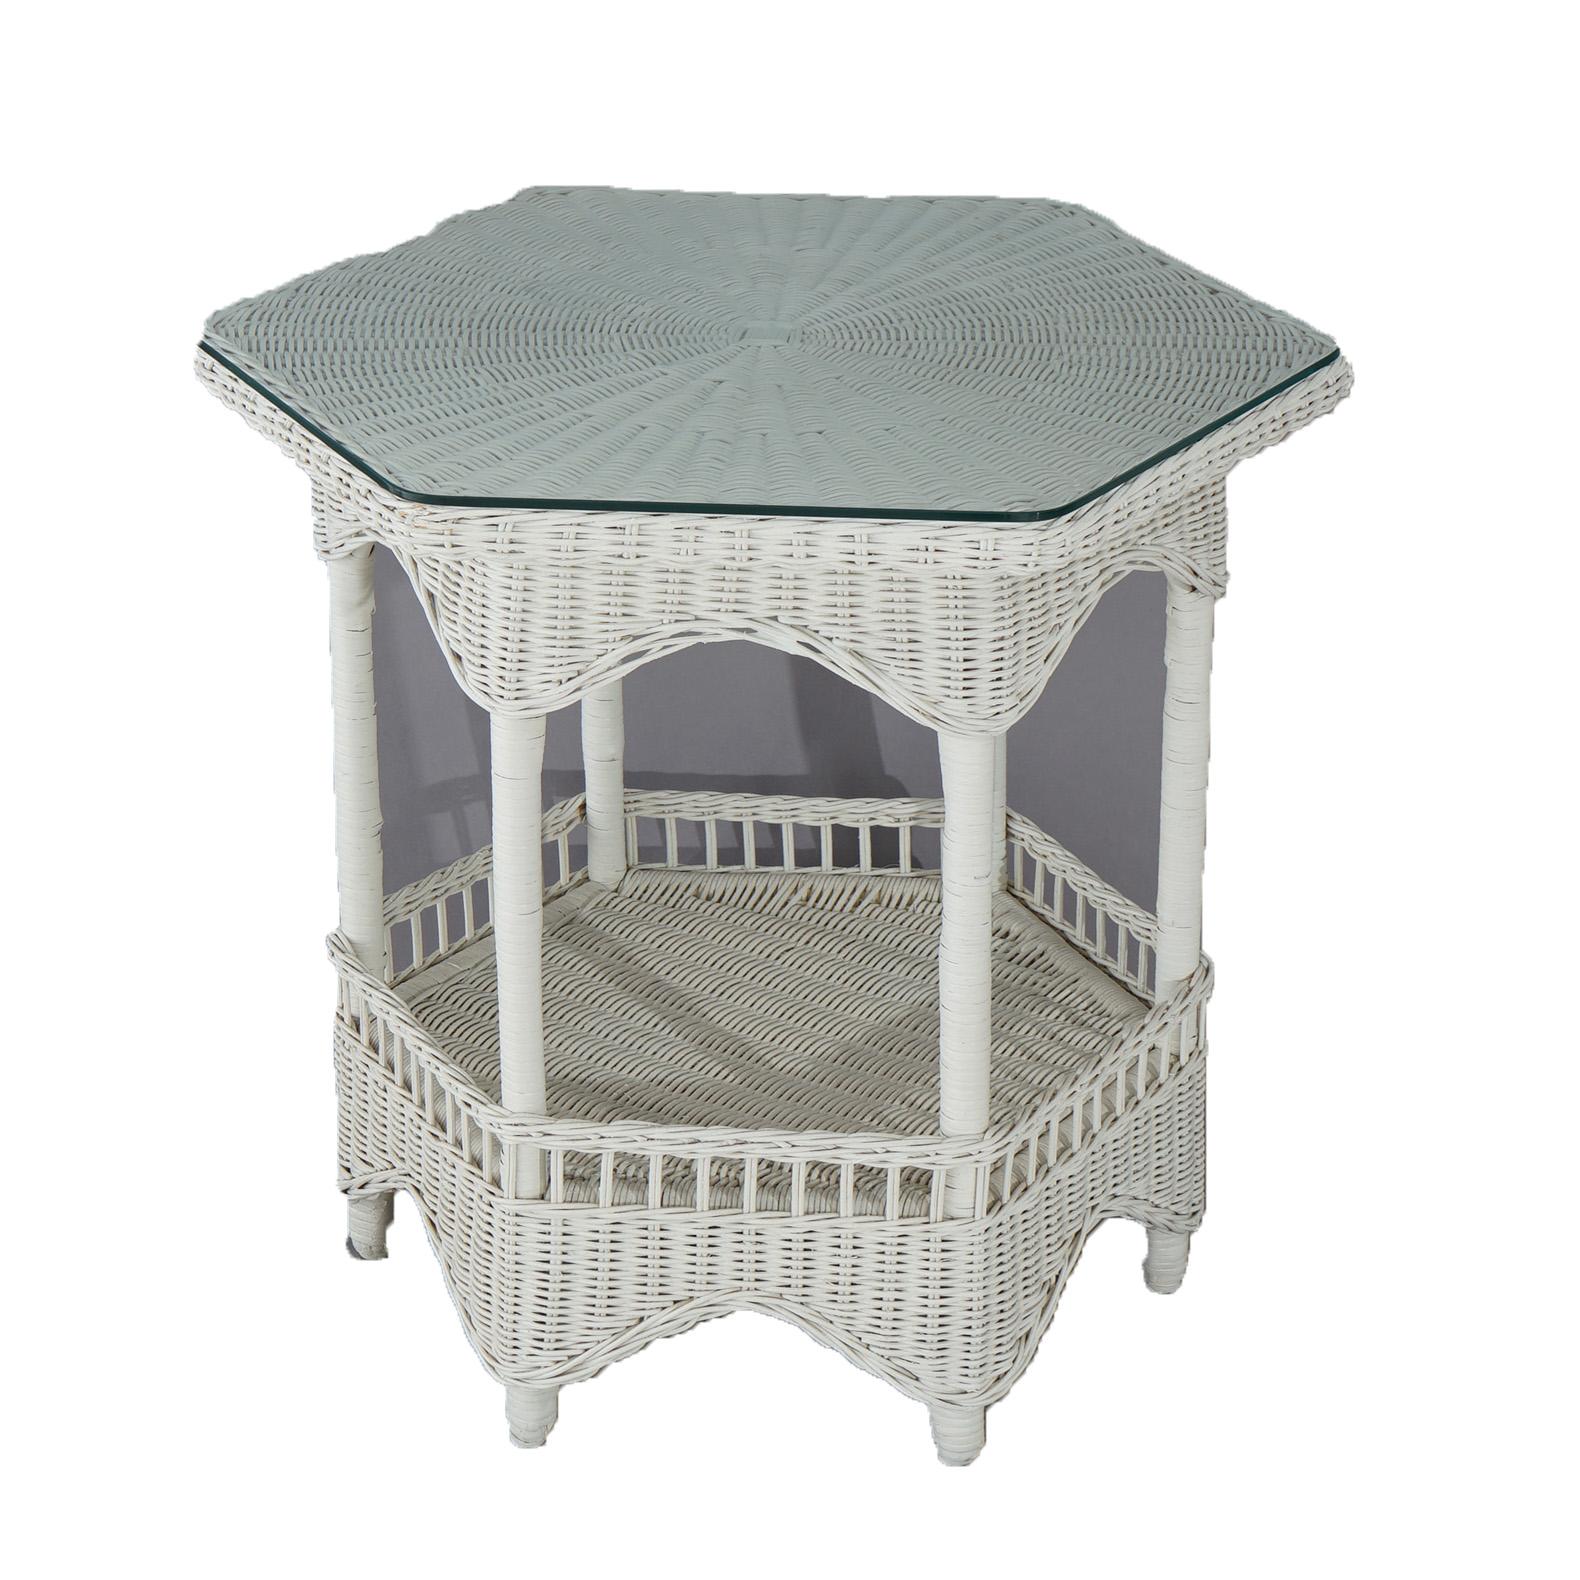 Heywood Wakefield School White Painted Wicker Side Table with Glass Top 20thC

Measures- 24.25''H x 23''W x 23